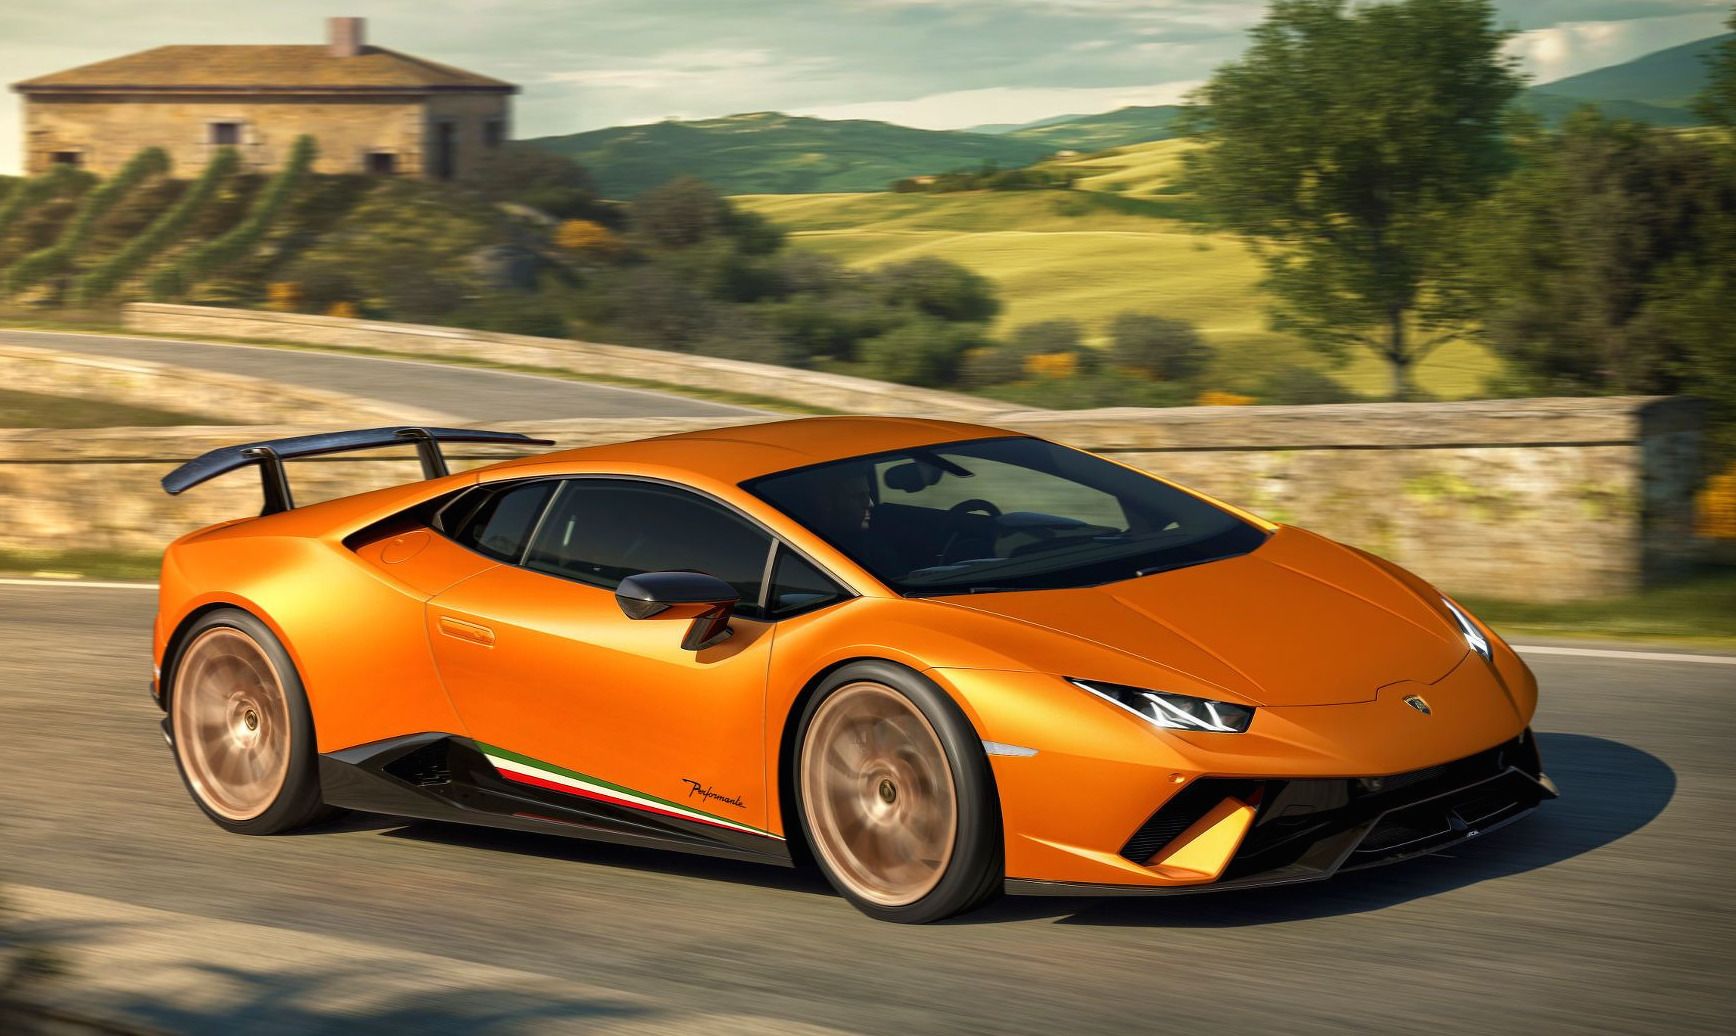 Lamborghini Huracan Performante officially revealed